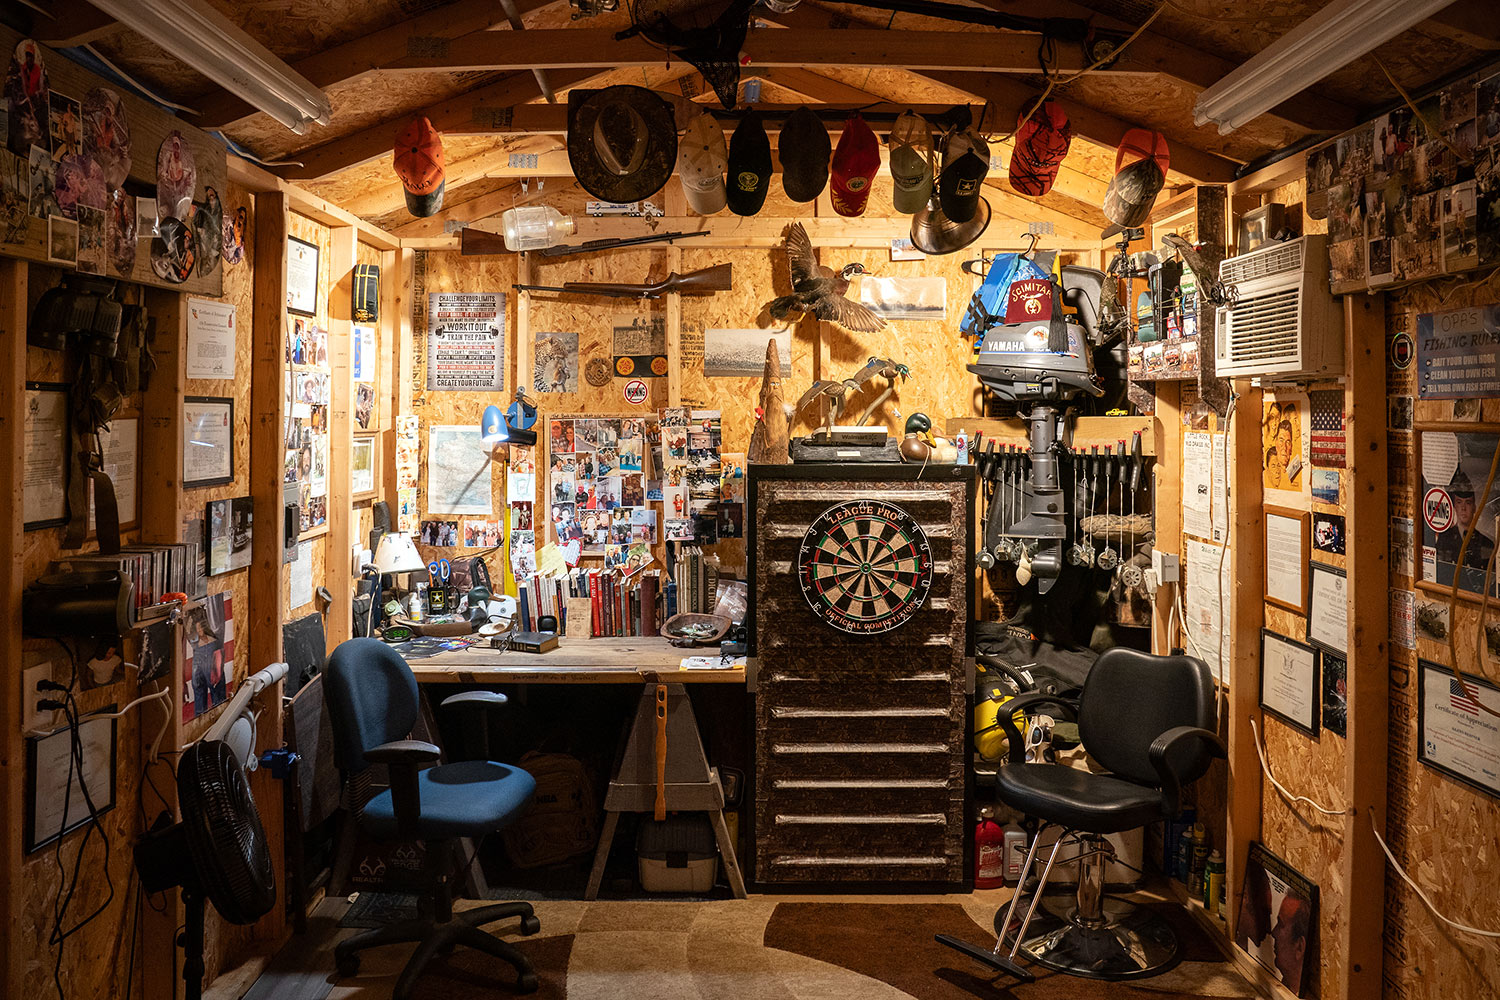 interior of shed-office has many photos, hats, and other wall decorations, plus dartboard, chairs, boat motor, and more